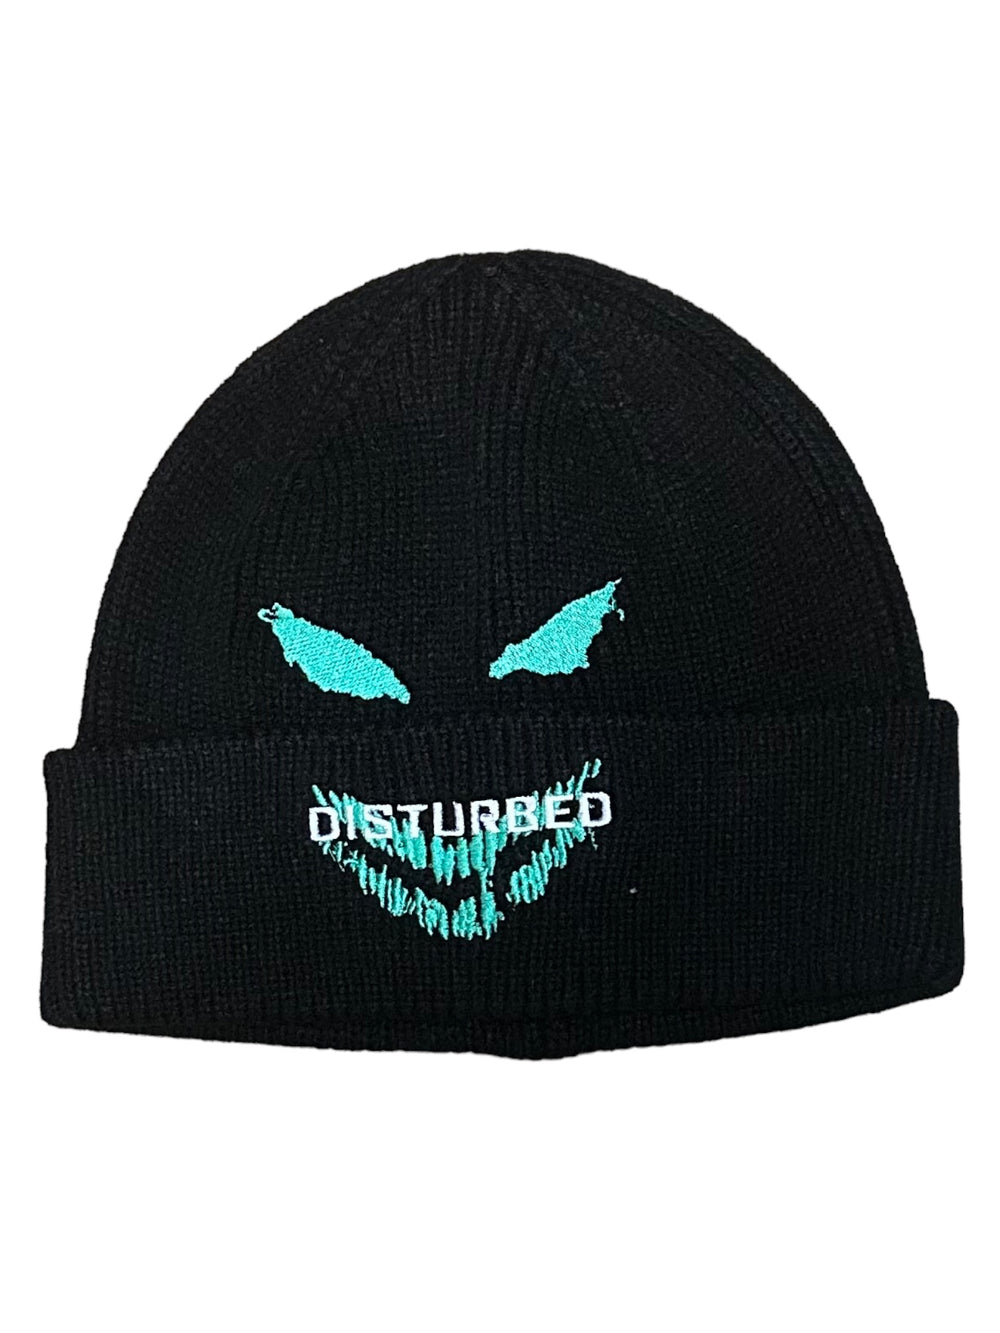 Disturbed - Green Face Official Beanie Hat One Size Fits All NEW